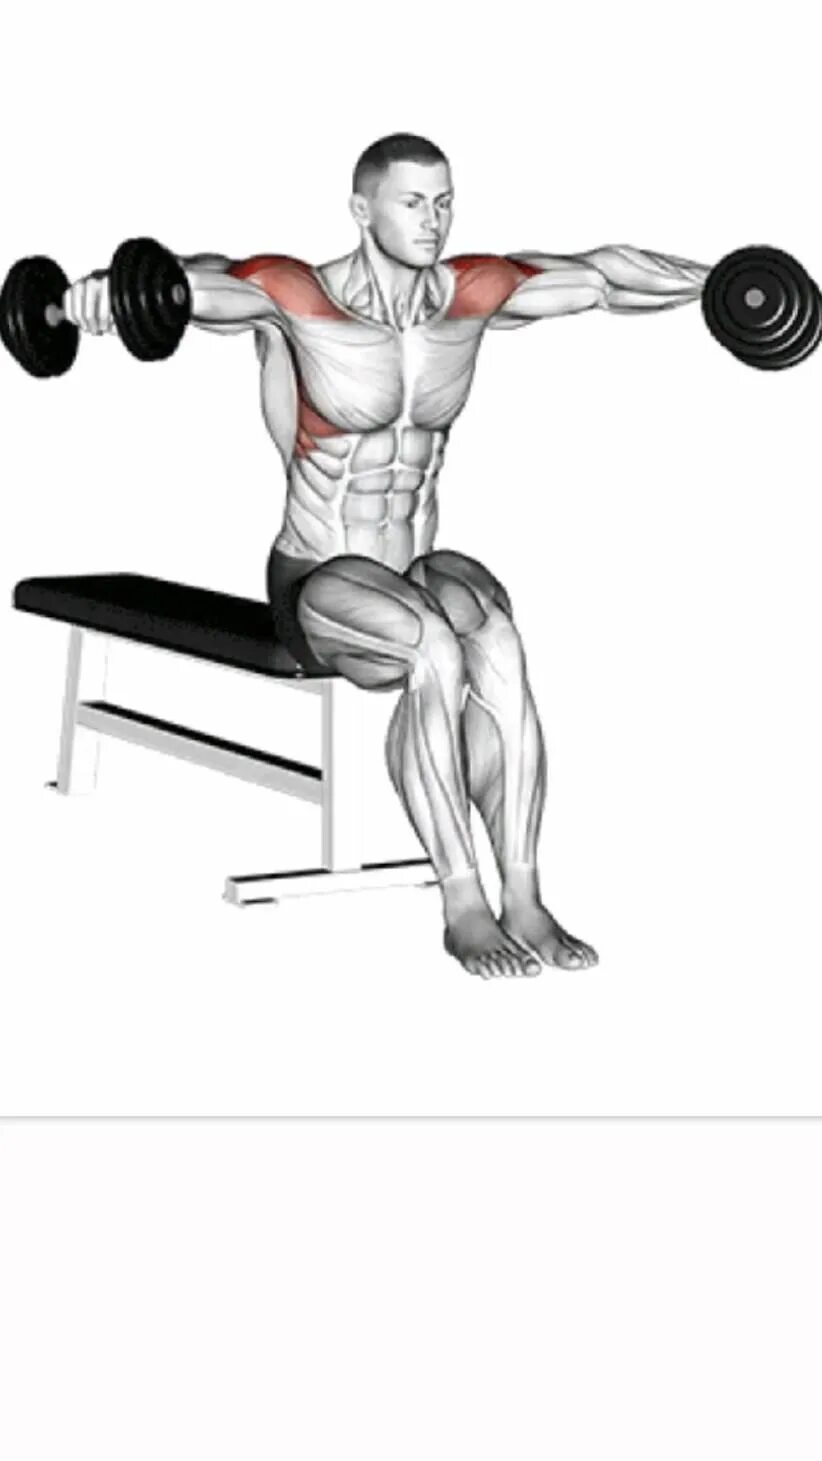 Seated Dumbbell lateral raise. Seated Rear delt Dumbbell Fly. Махи гантелями в стороны сидя. Махи в стороны мышцы.